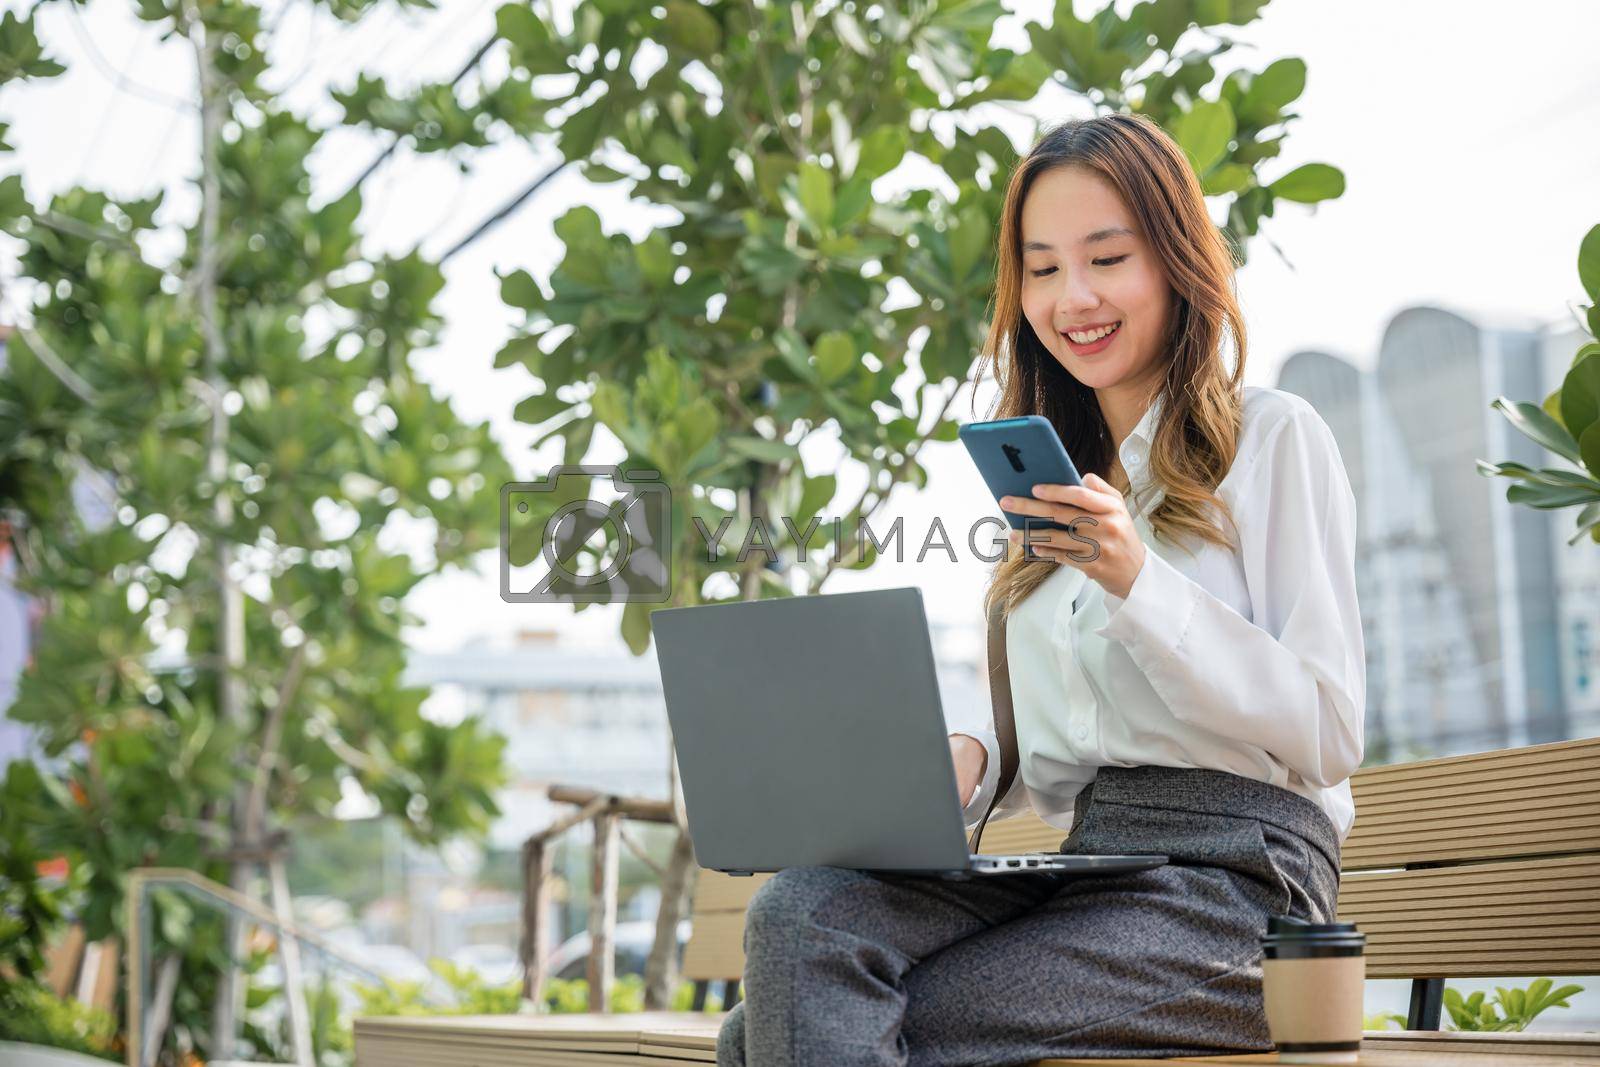 Royalty free image of young woman working laptop and using mobile smartphone outdoor building exterior by Sorapop